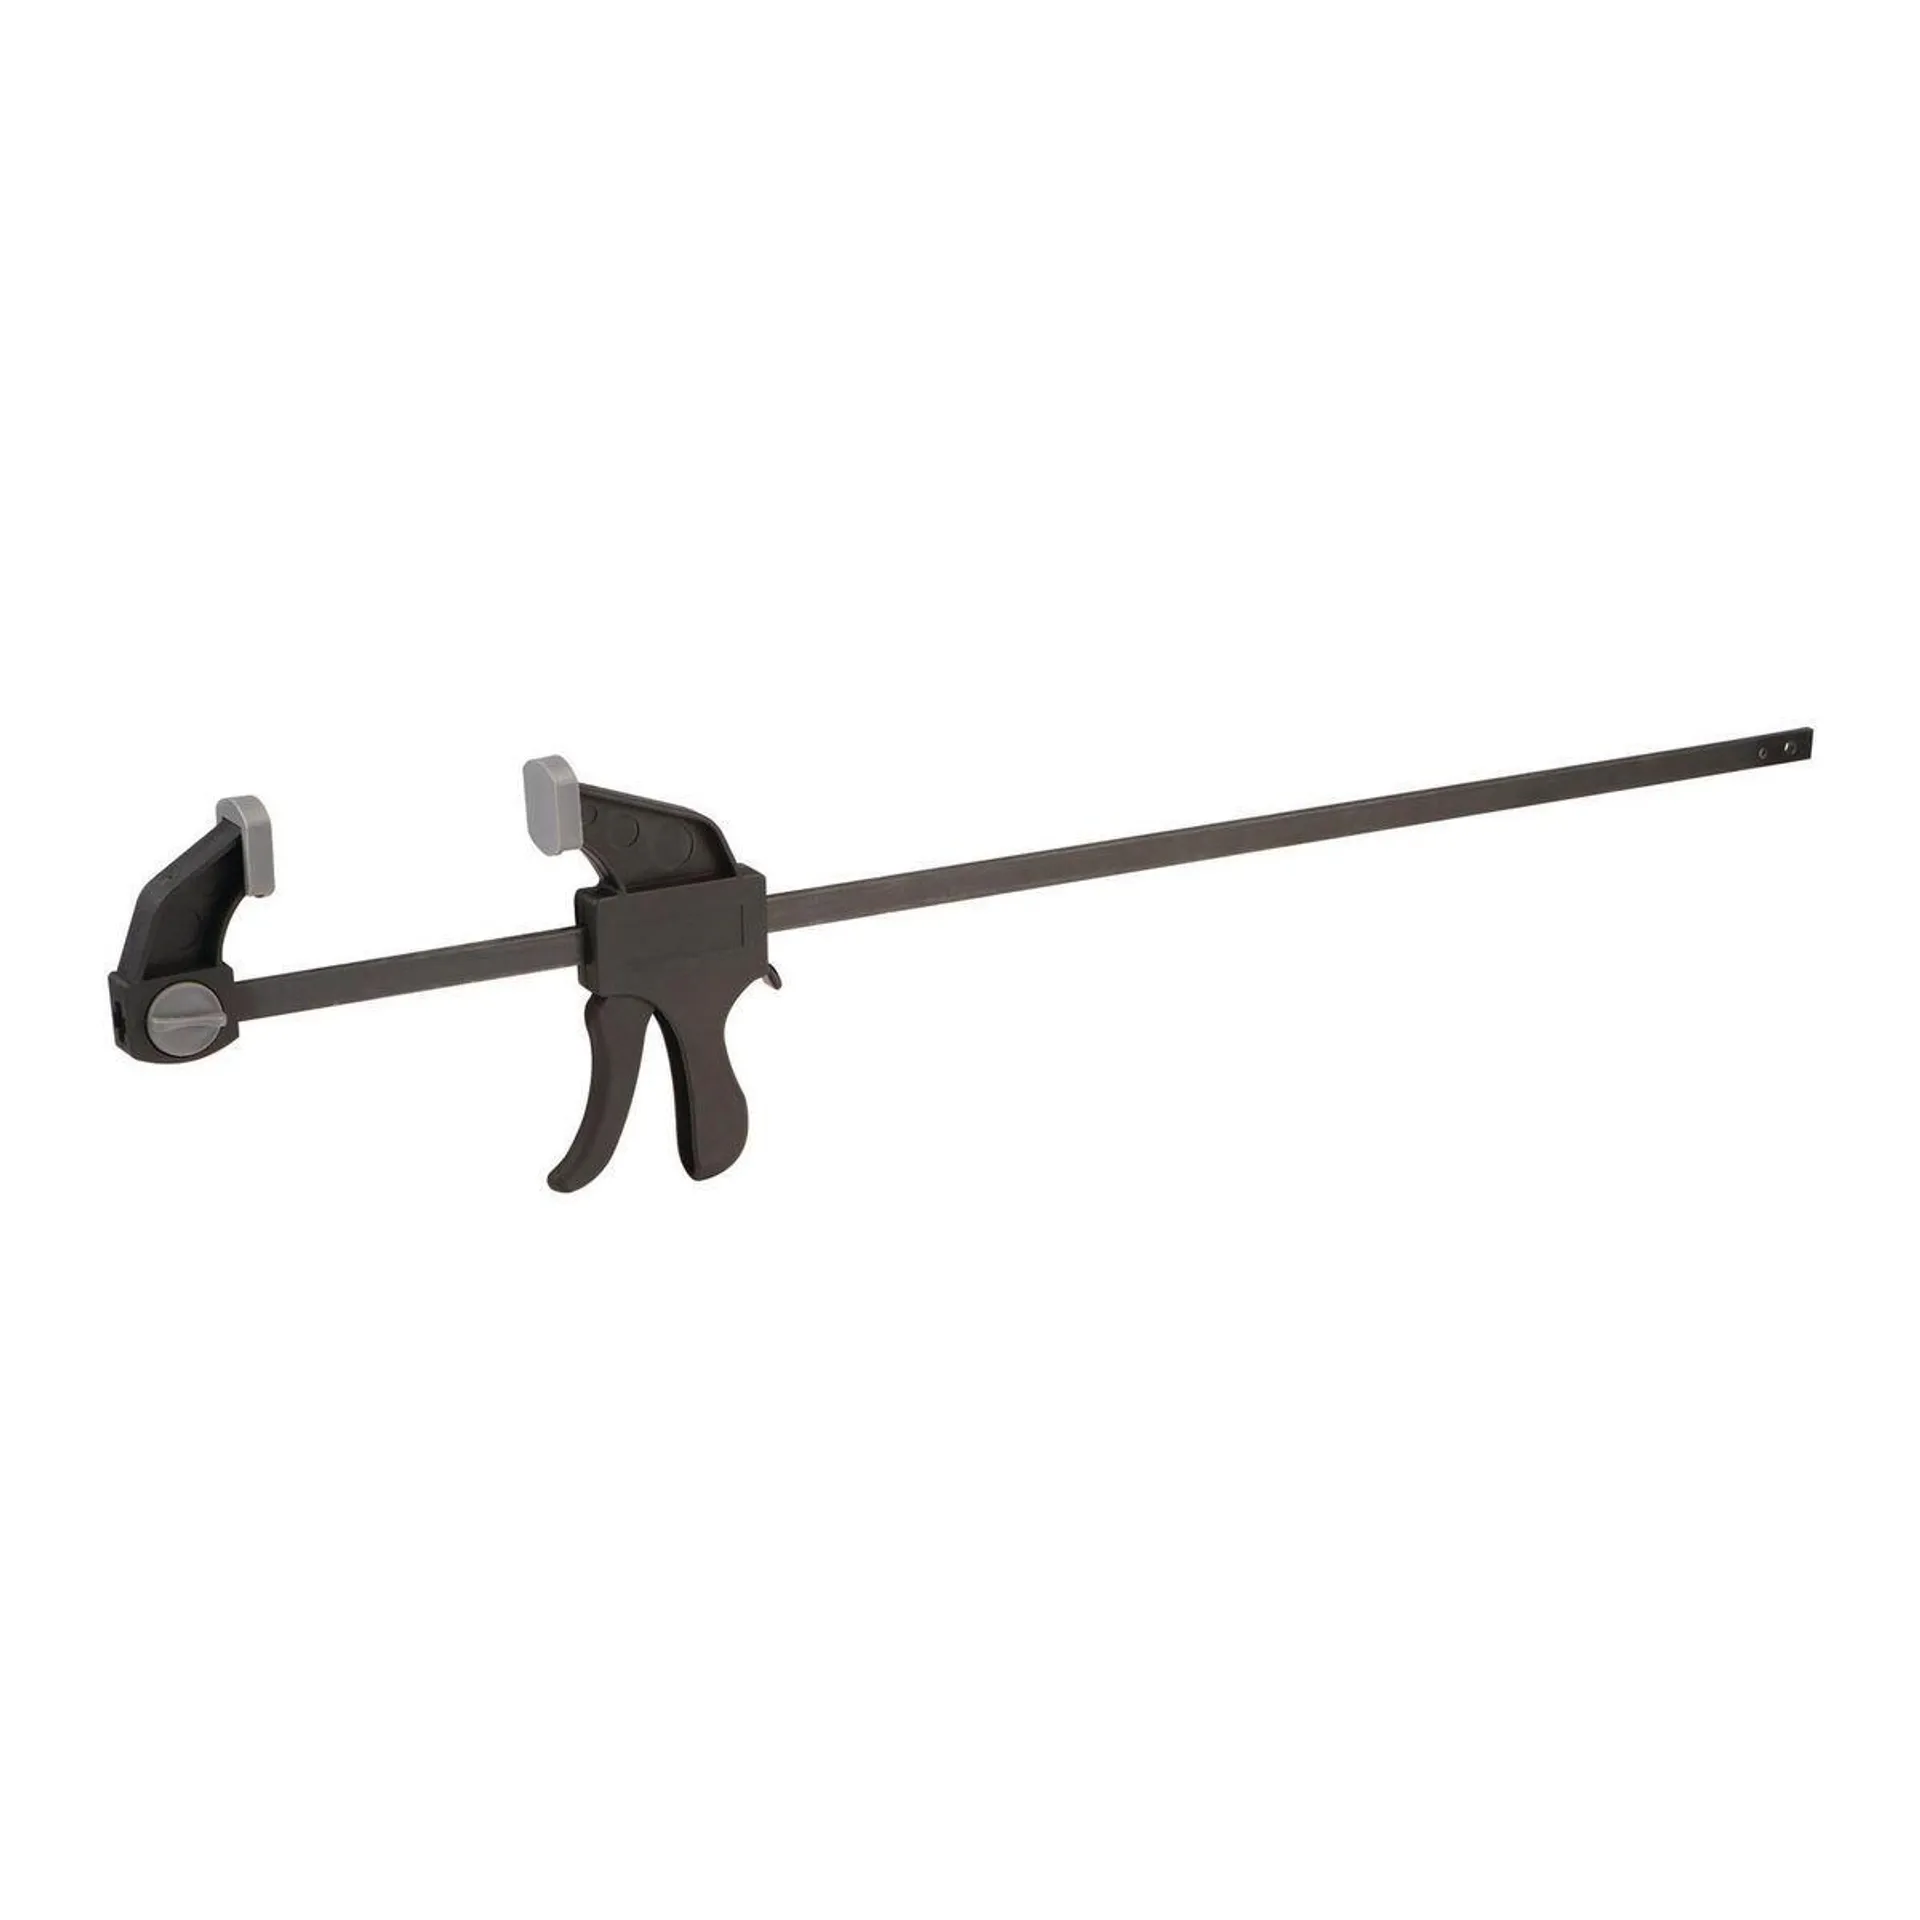 PITTSBURGH 24 in. Ratcheting Bar Clamp/Spreader